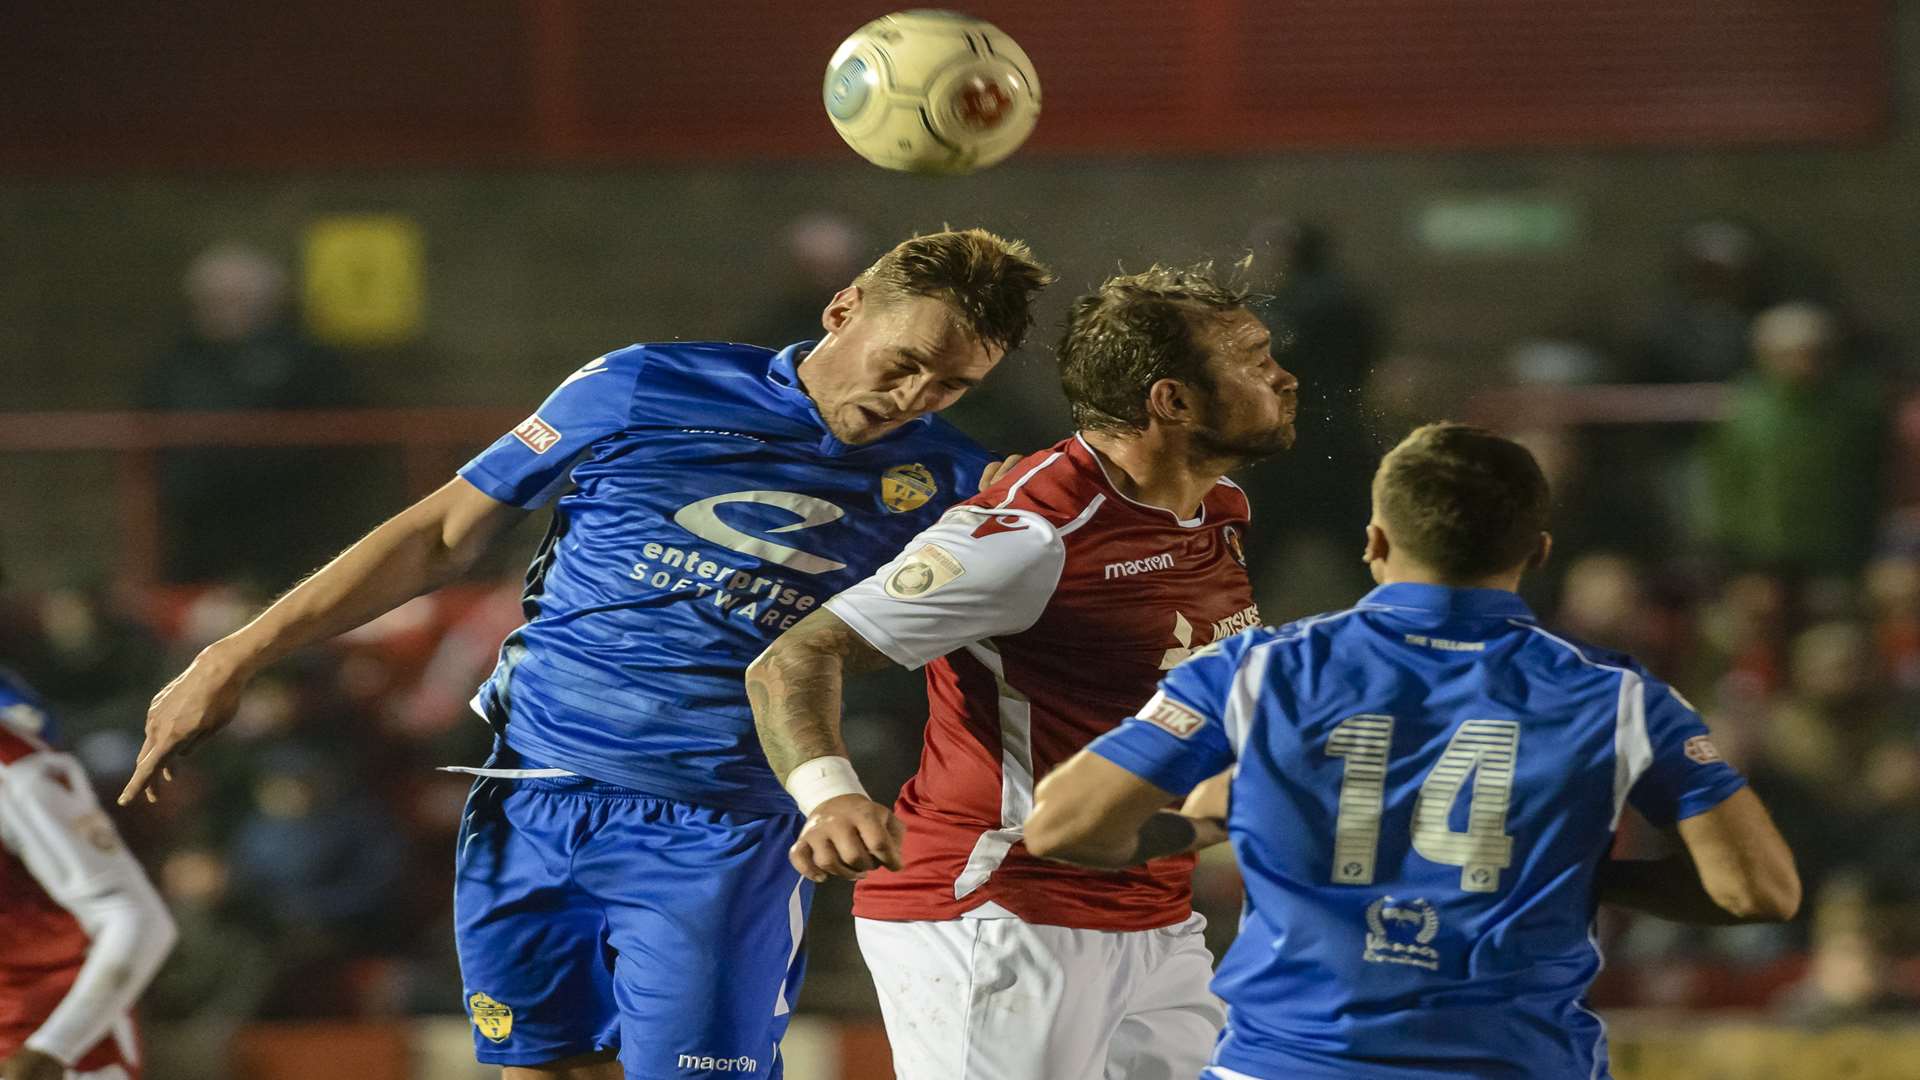 Danny Kedwell up for a header against Warrington Picture: Andy Payton